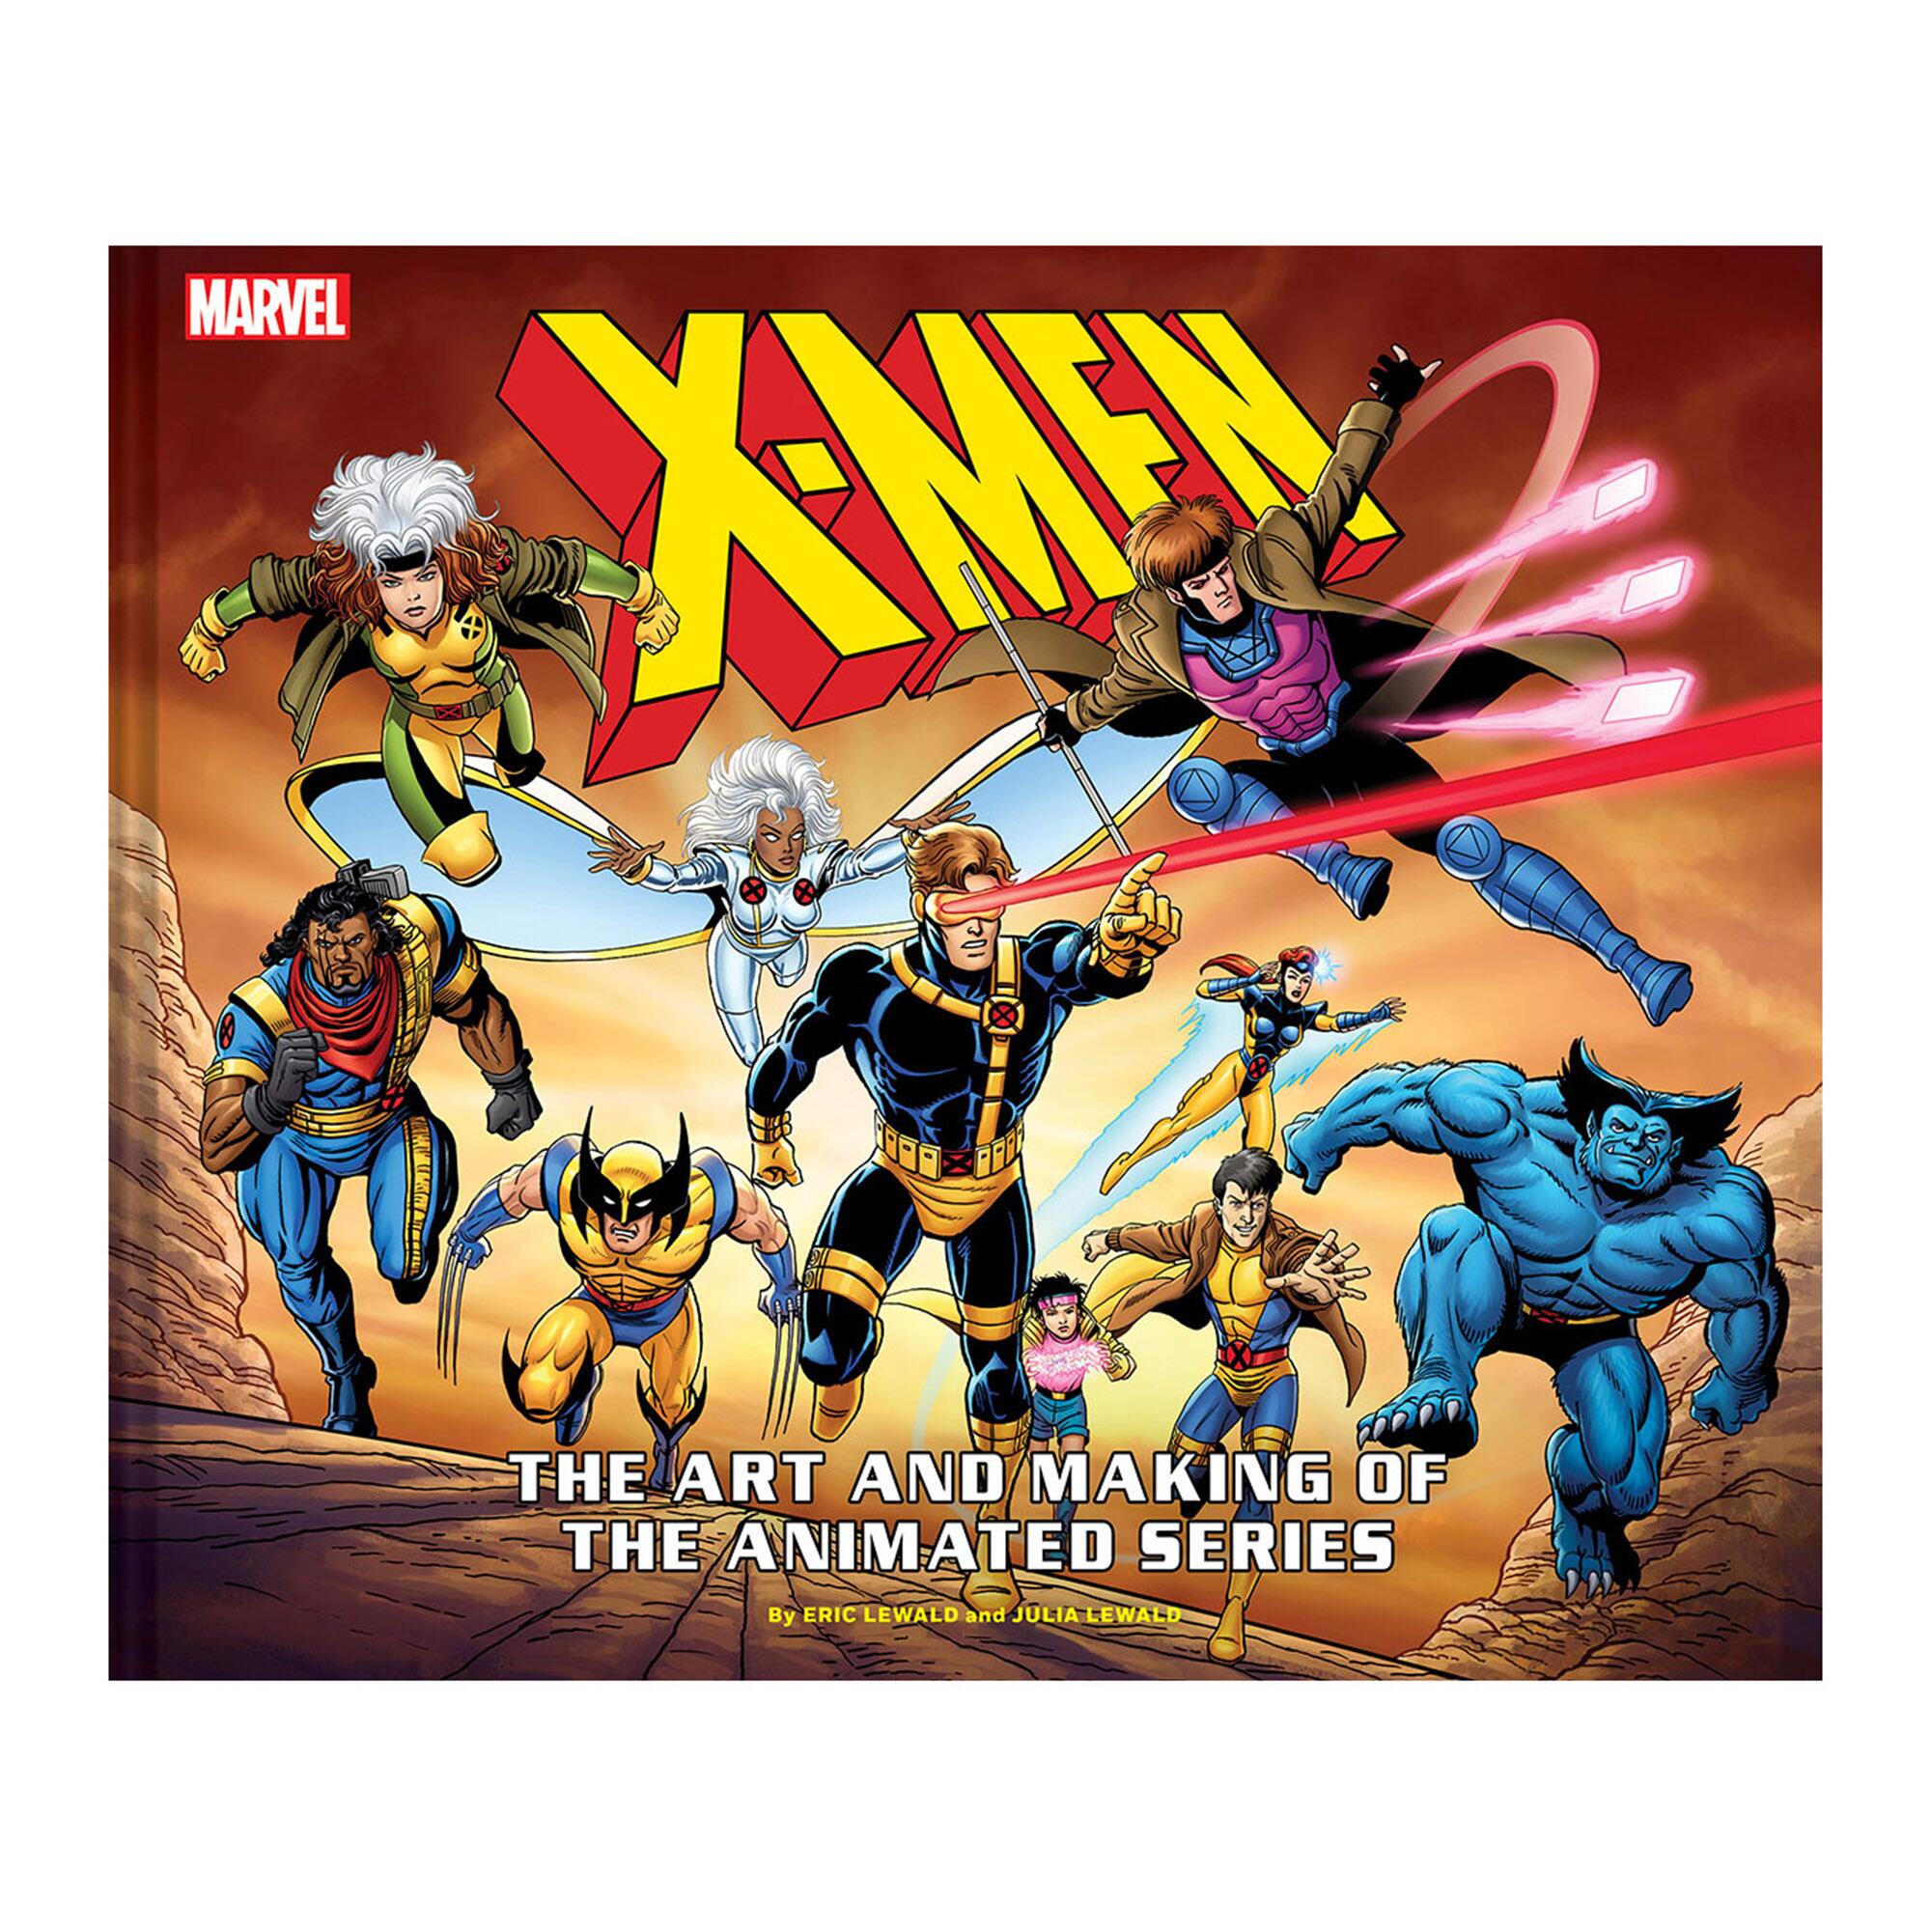 Cover of the book "X-Men: The Art and Making of The Animated Series" by Eric Lewald and Julia Lewald.